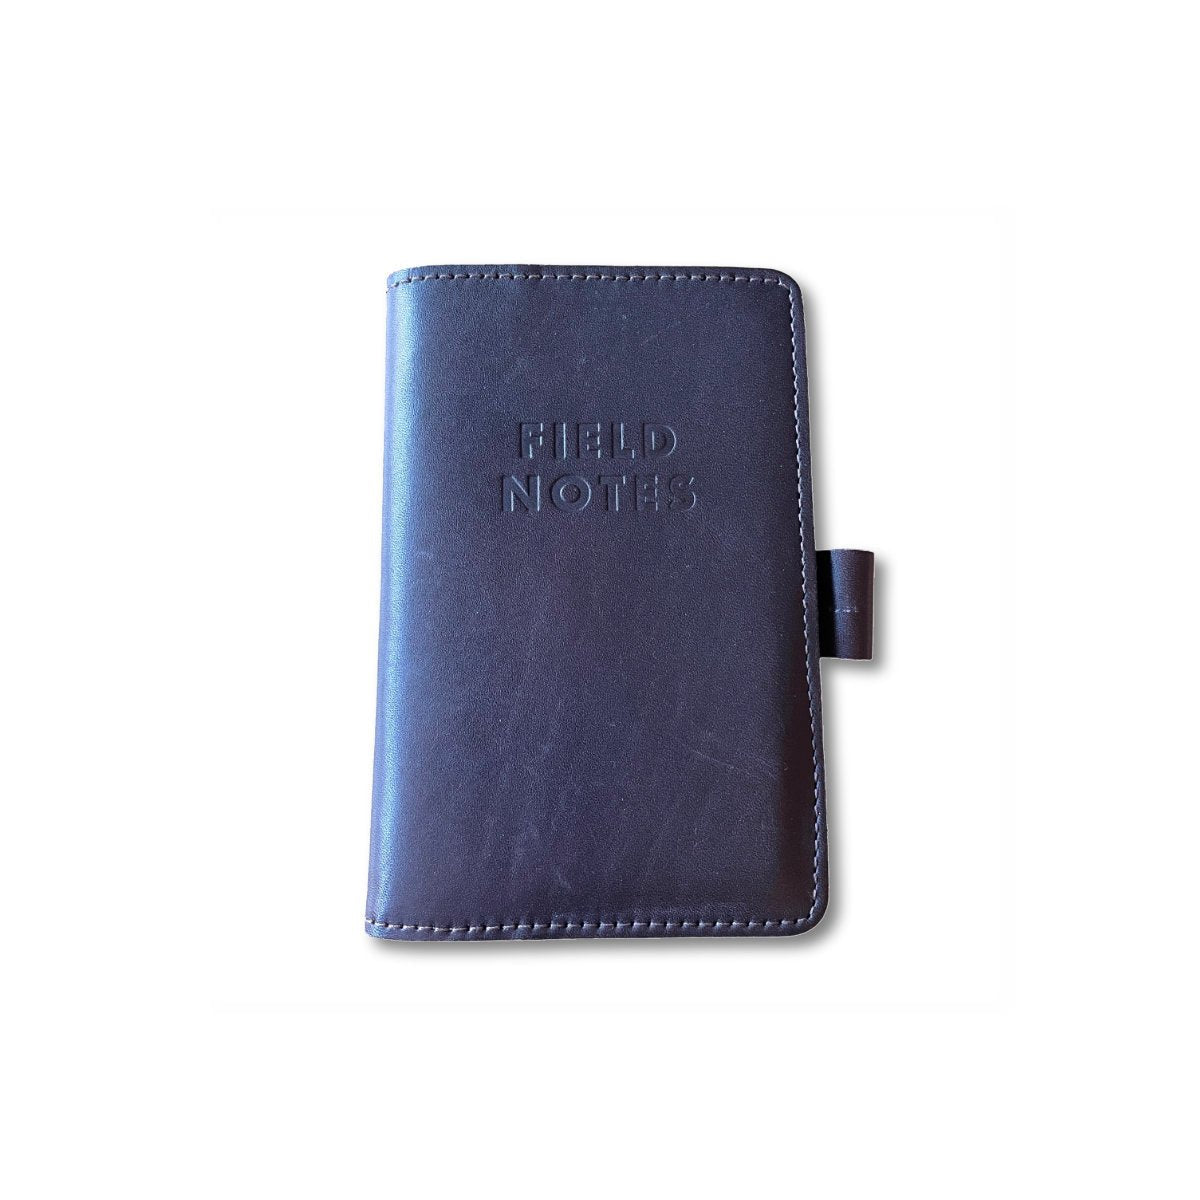 Field Notes - Daily Carry Leather Cover (Used) - Notegeist